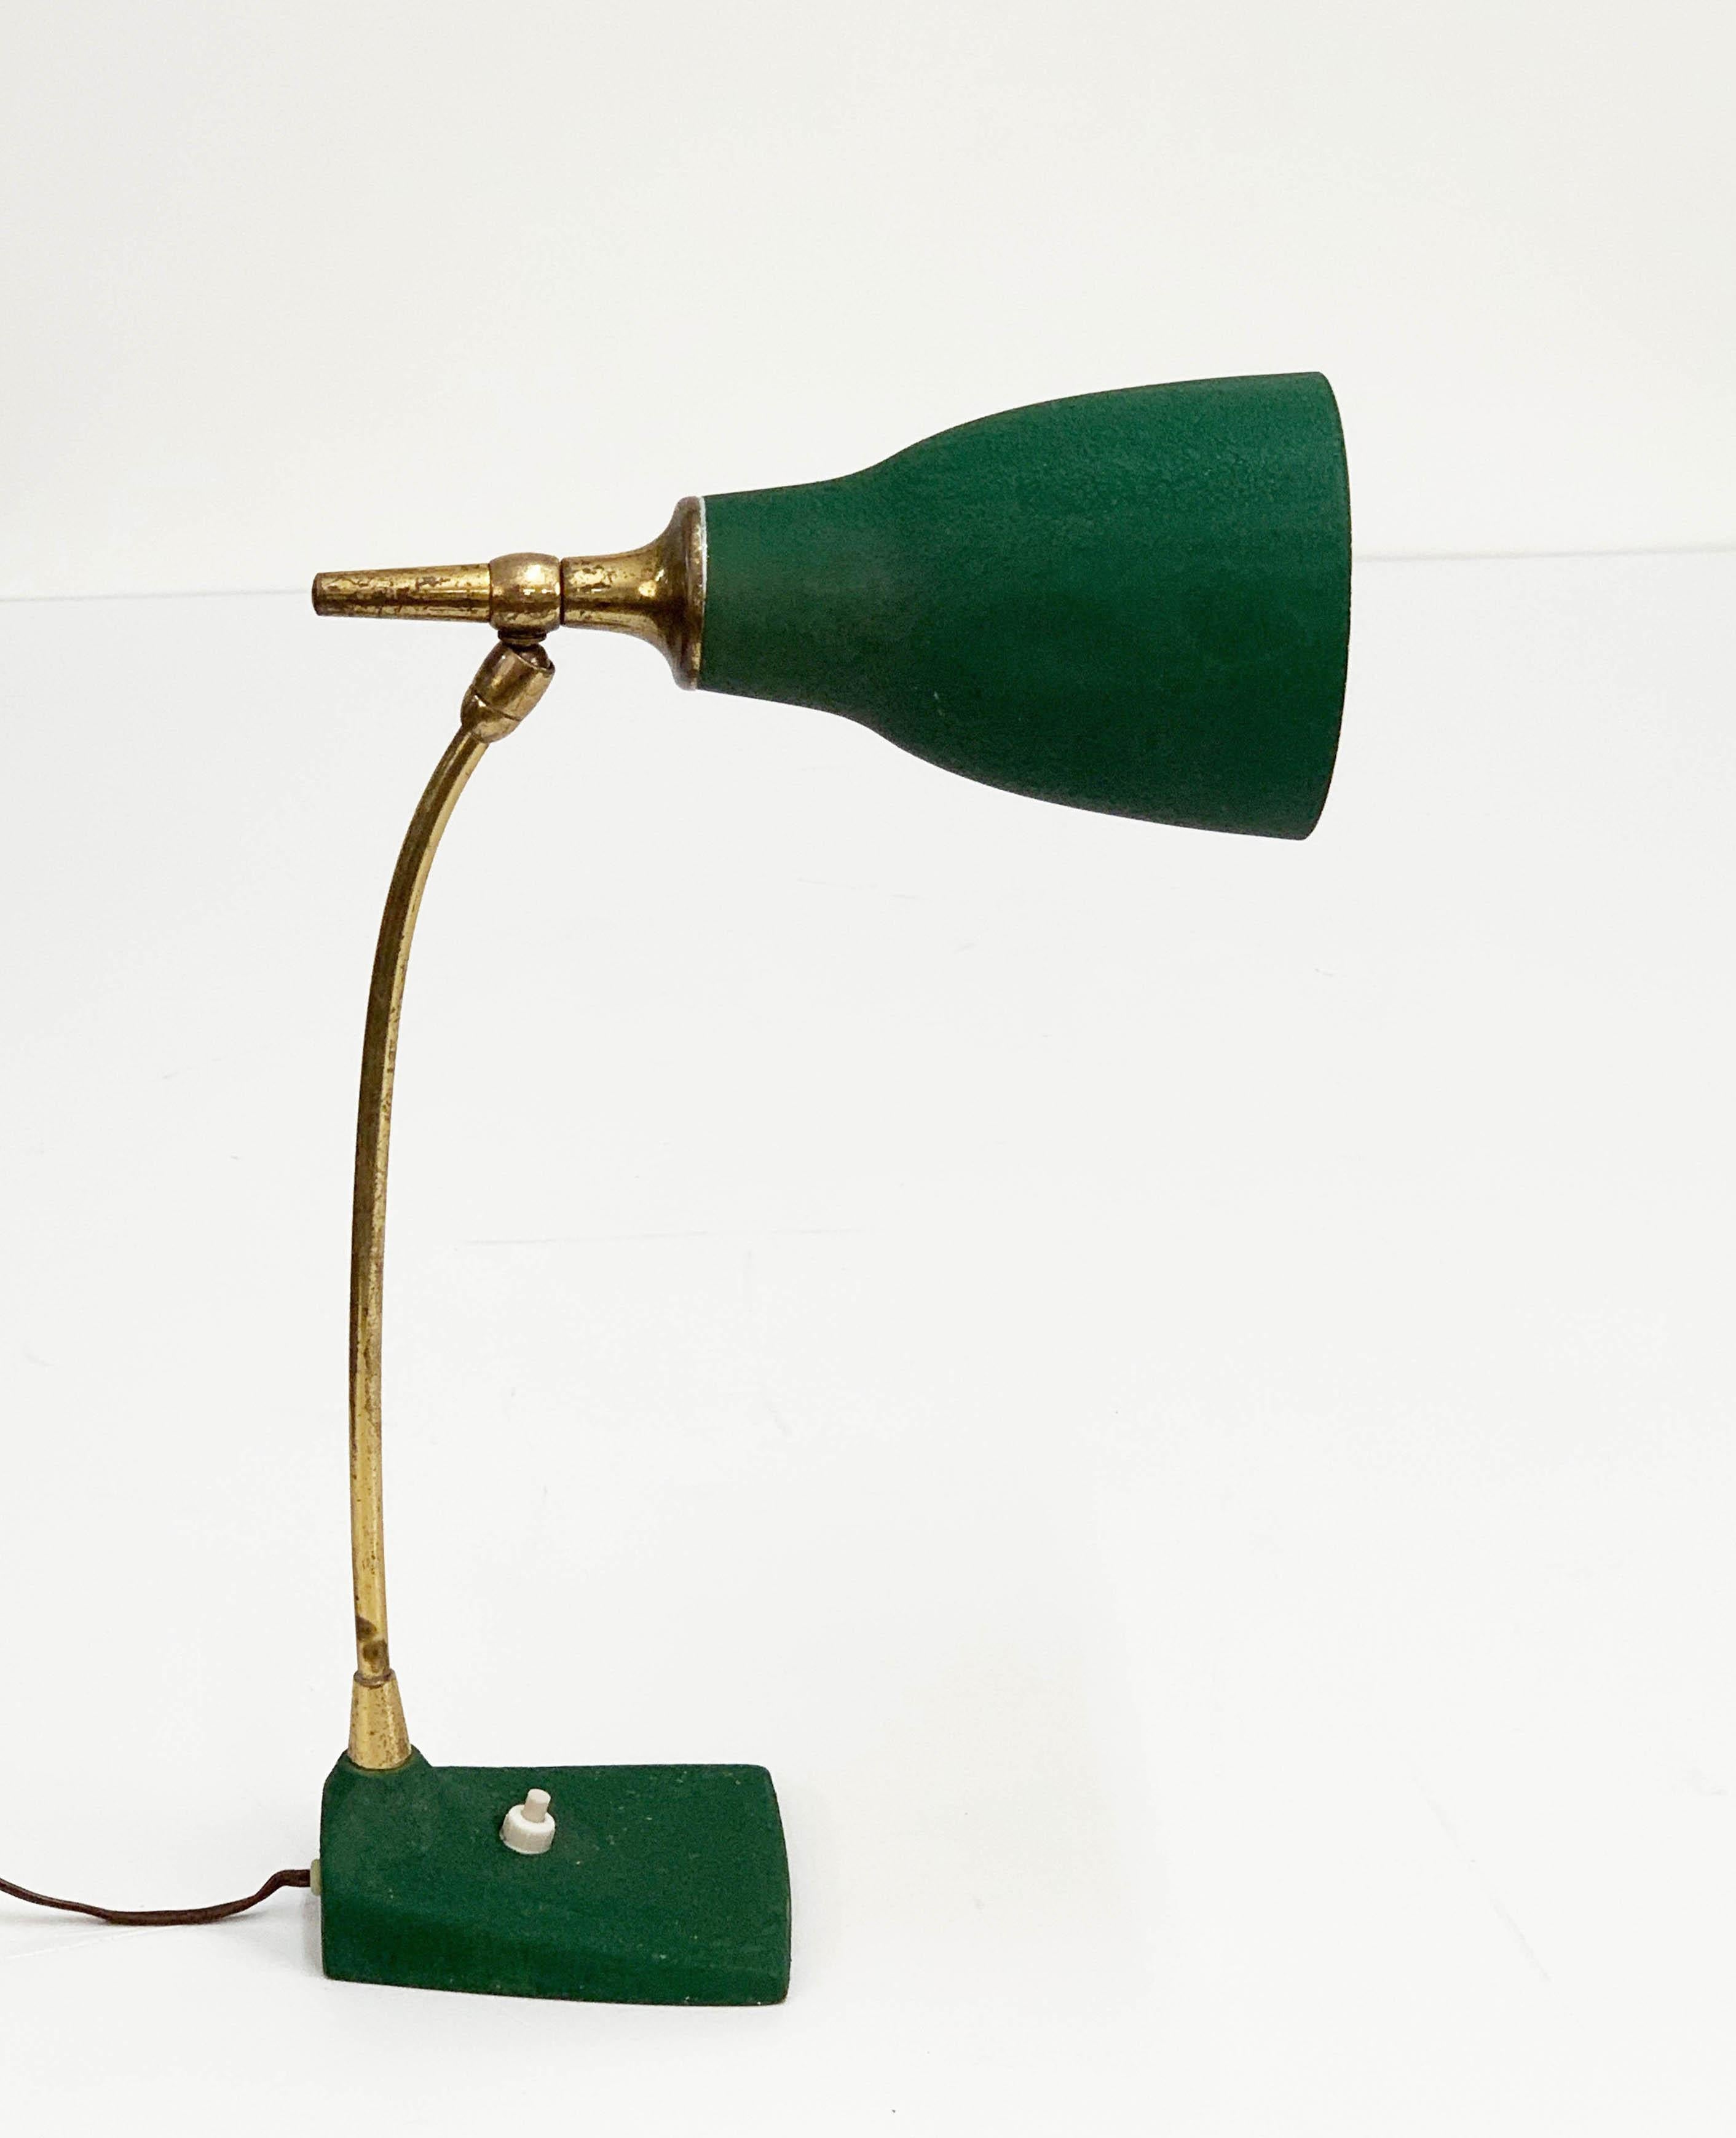 Midcentury Gebrüder Cosack Adjustable Green Brass and Cast Iron Table Lamp 1950s For Sale 6